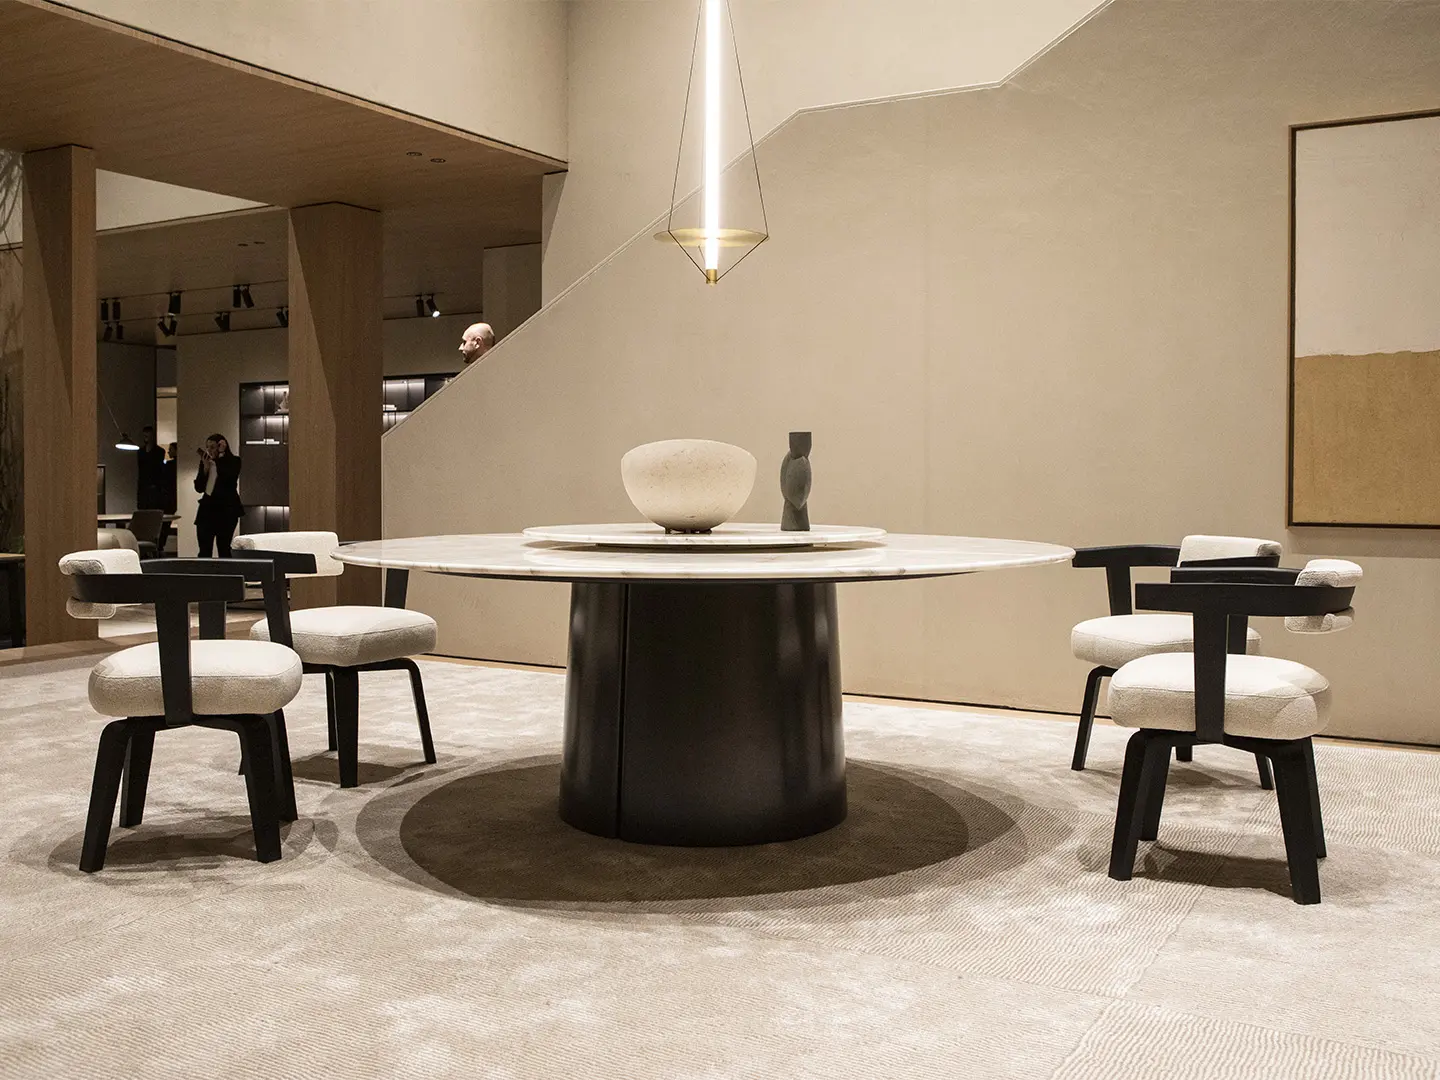 molteni, stand, salone milano, living room, chair, table